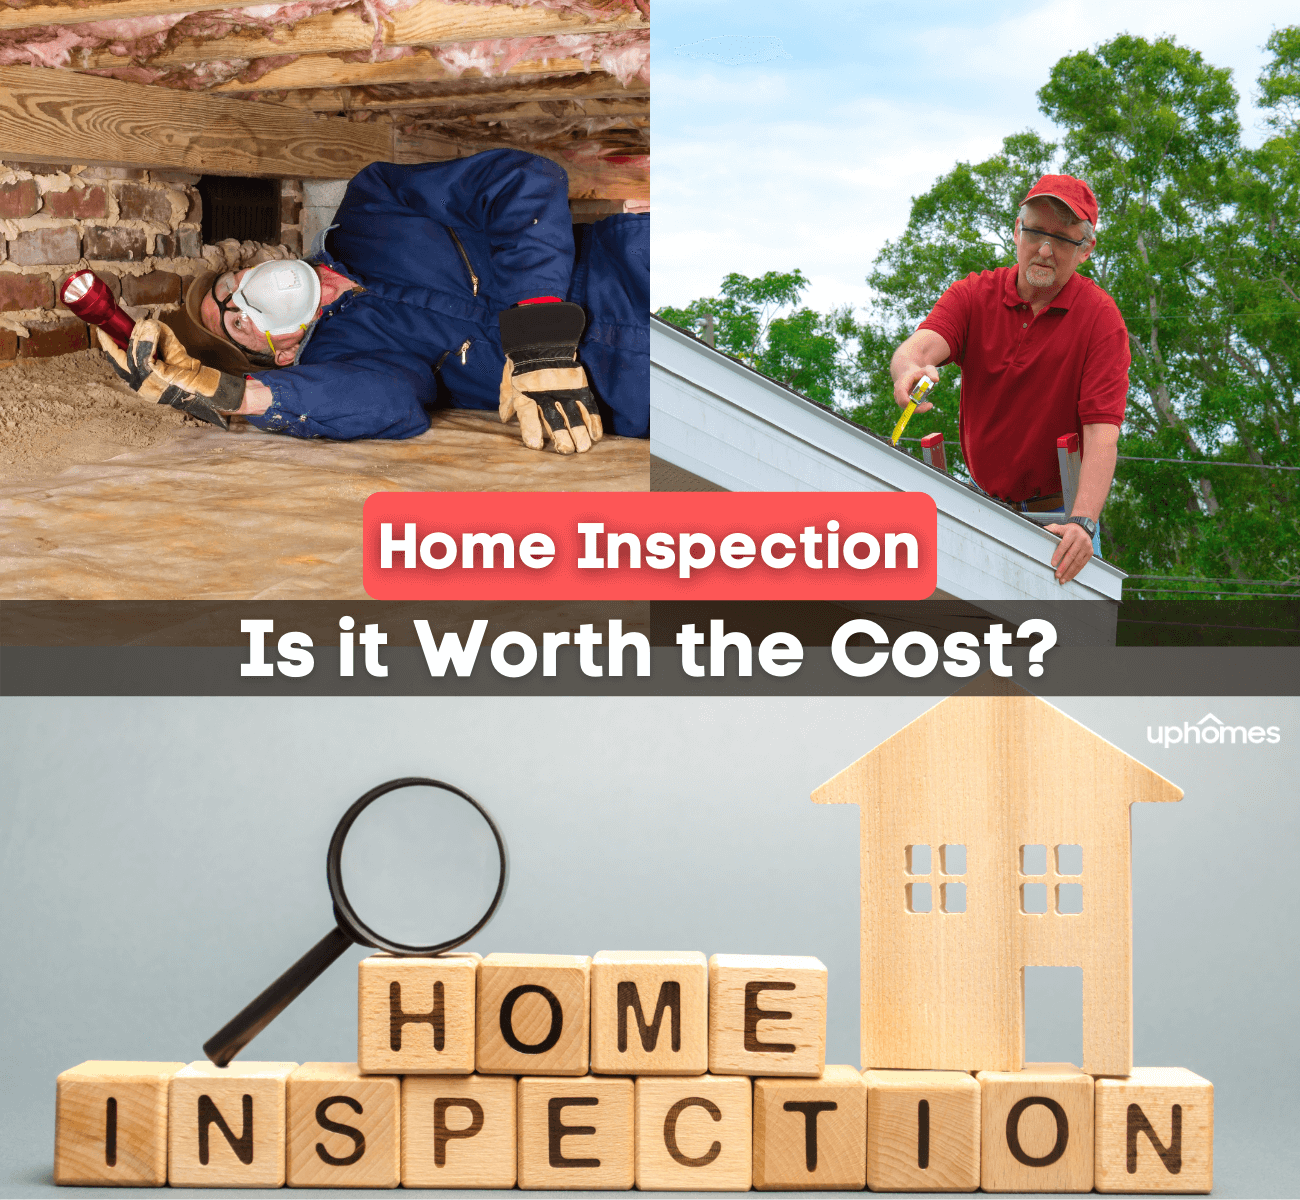 Home Inspection: Is it worth the cost having someone inspect my home from the roof to the crawl space